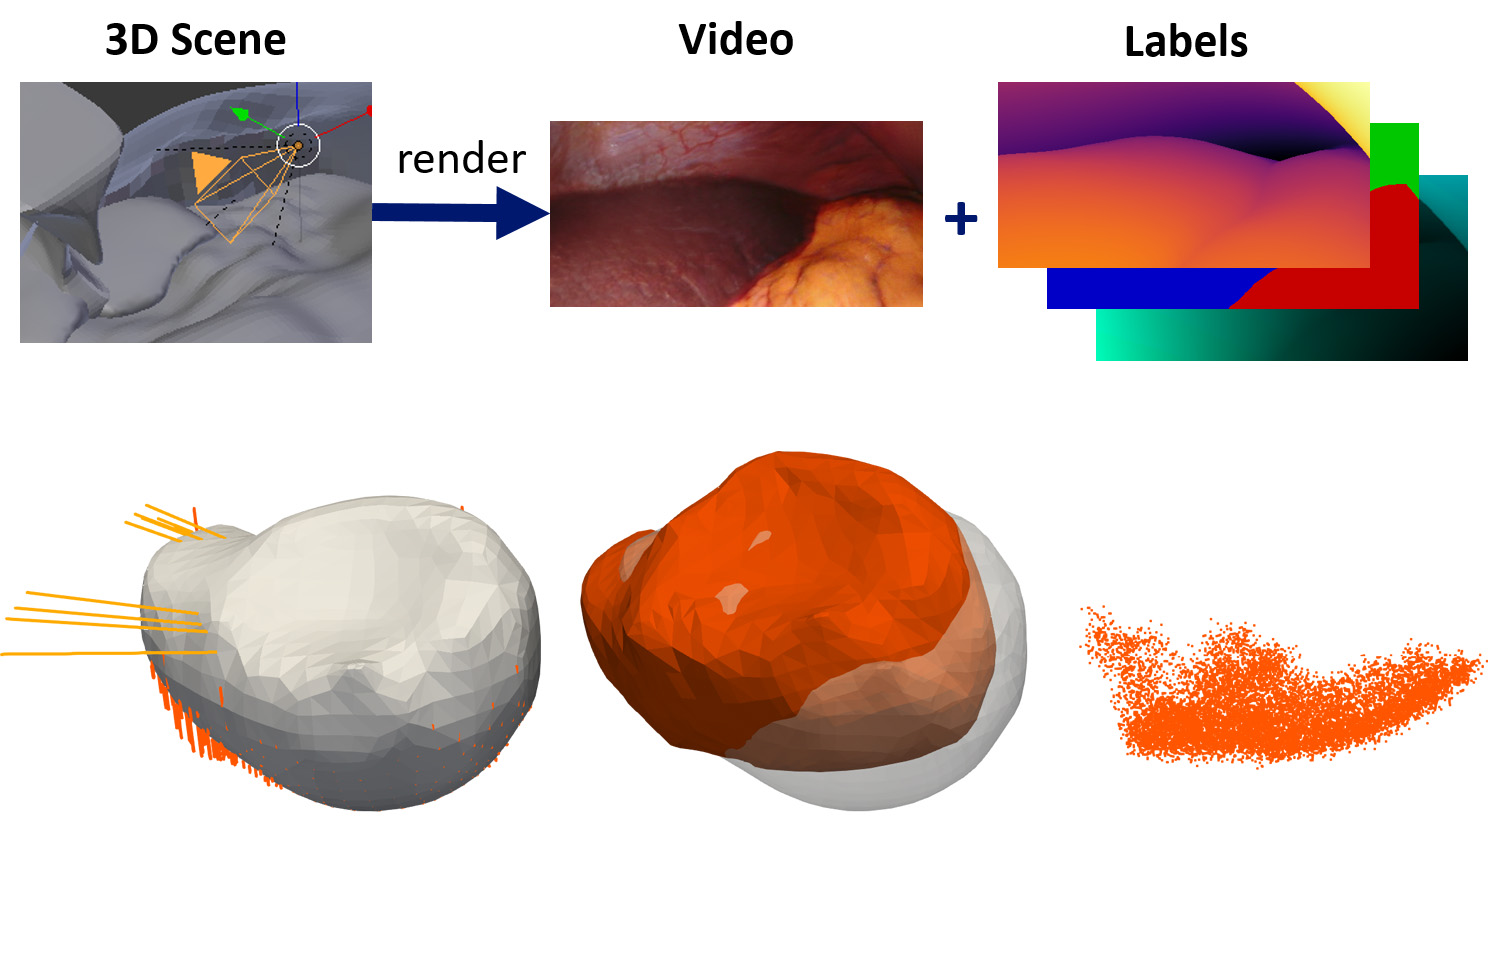 Infographic about the rendering from a 3D scene to a video with labeling for human organs